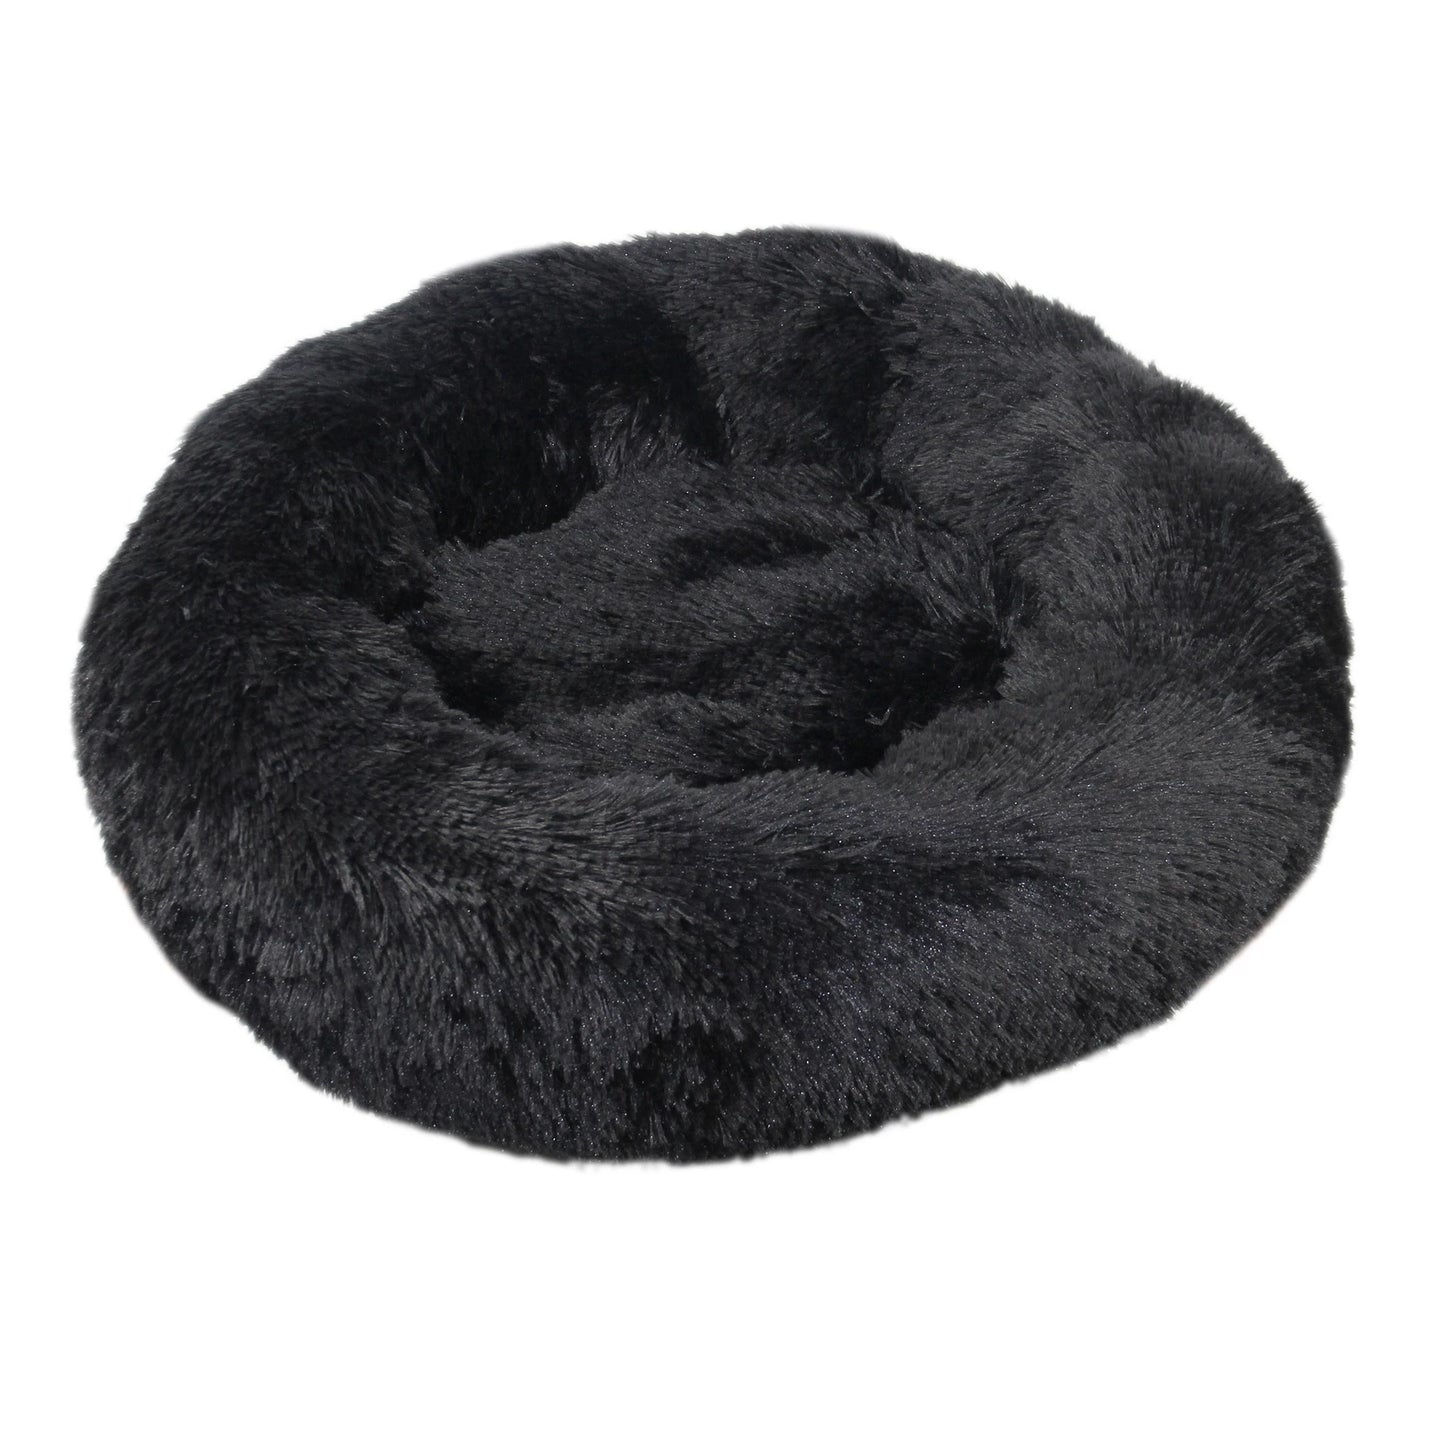 A black plush dog bed shaped like a donut, offering a comfortable and secure space for small dogs to curl up and relax.